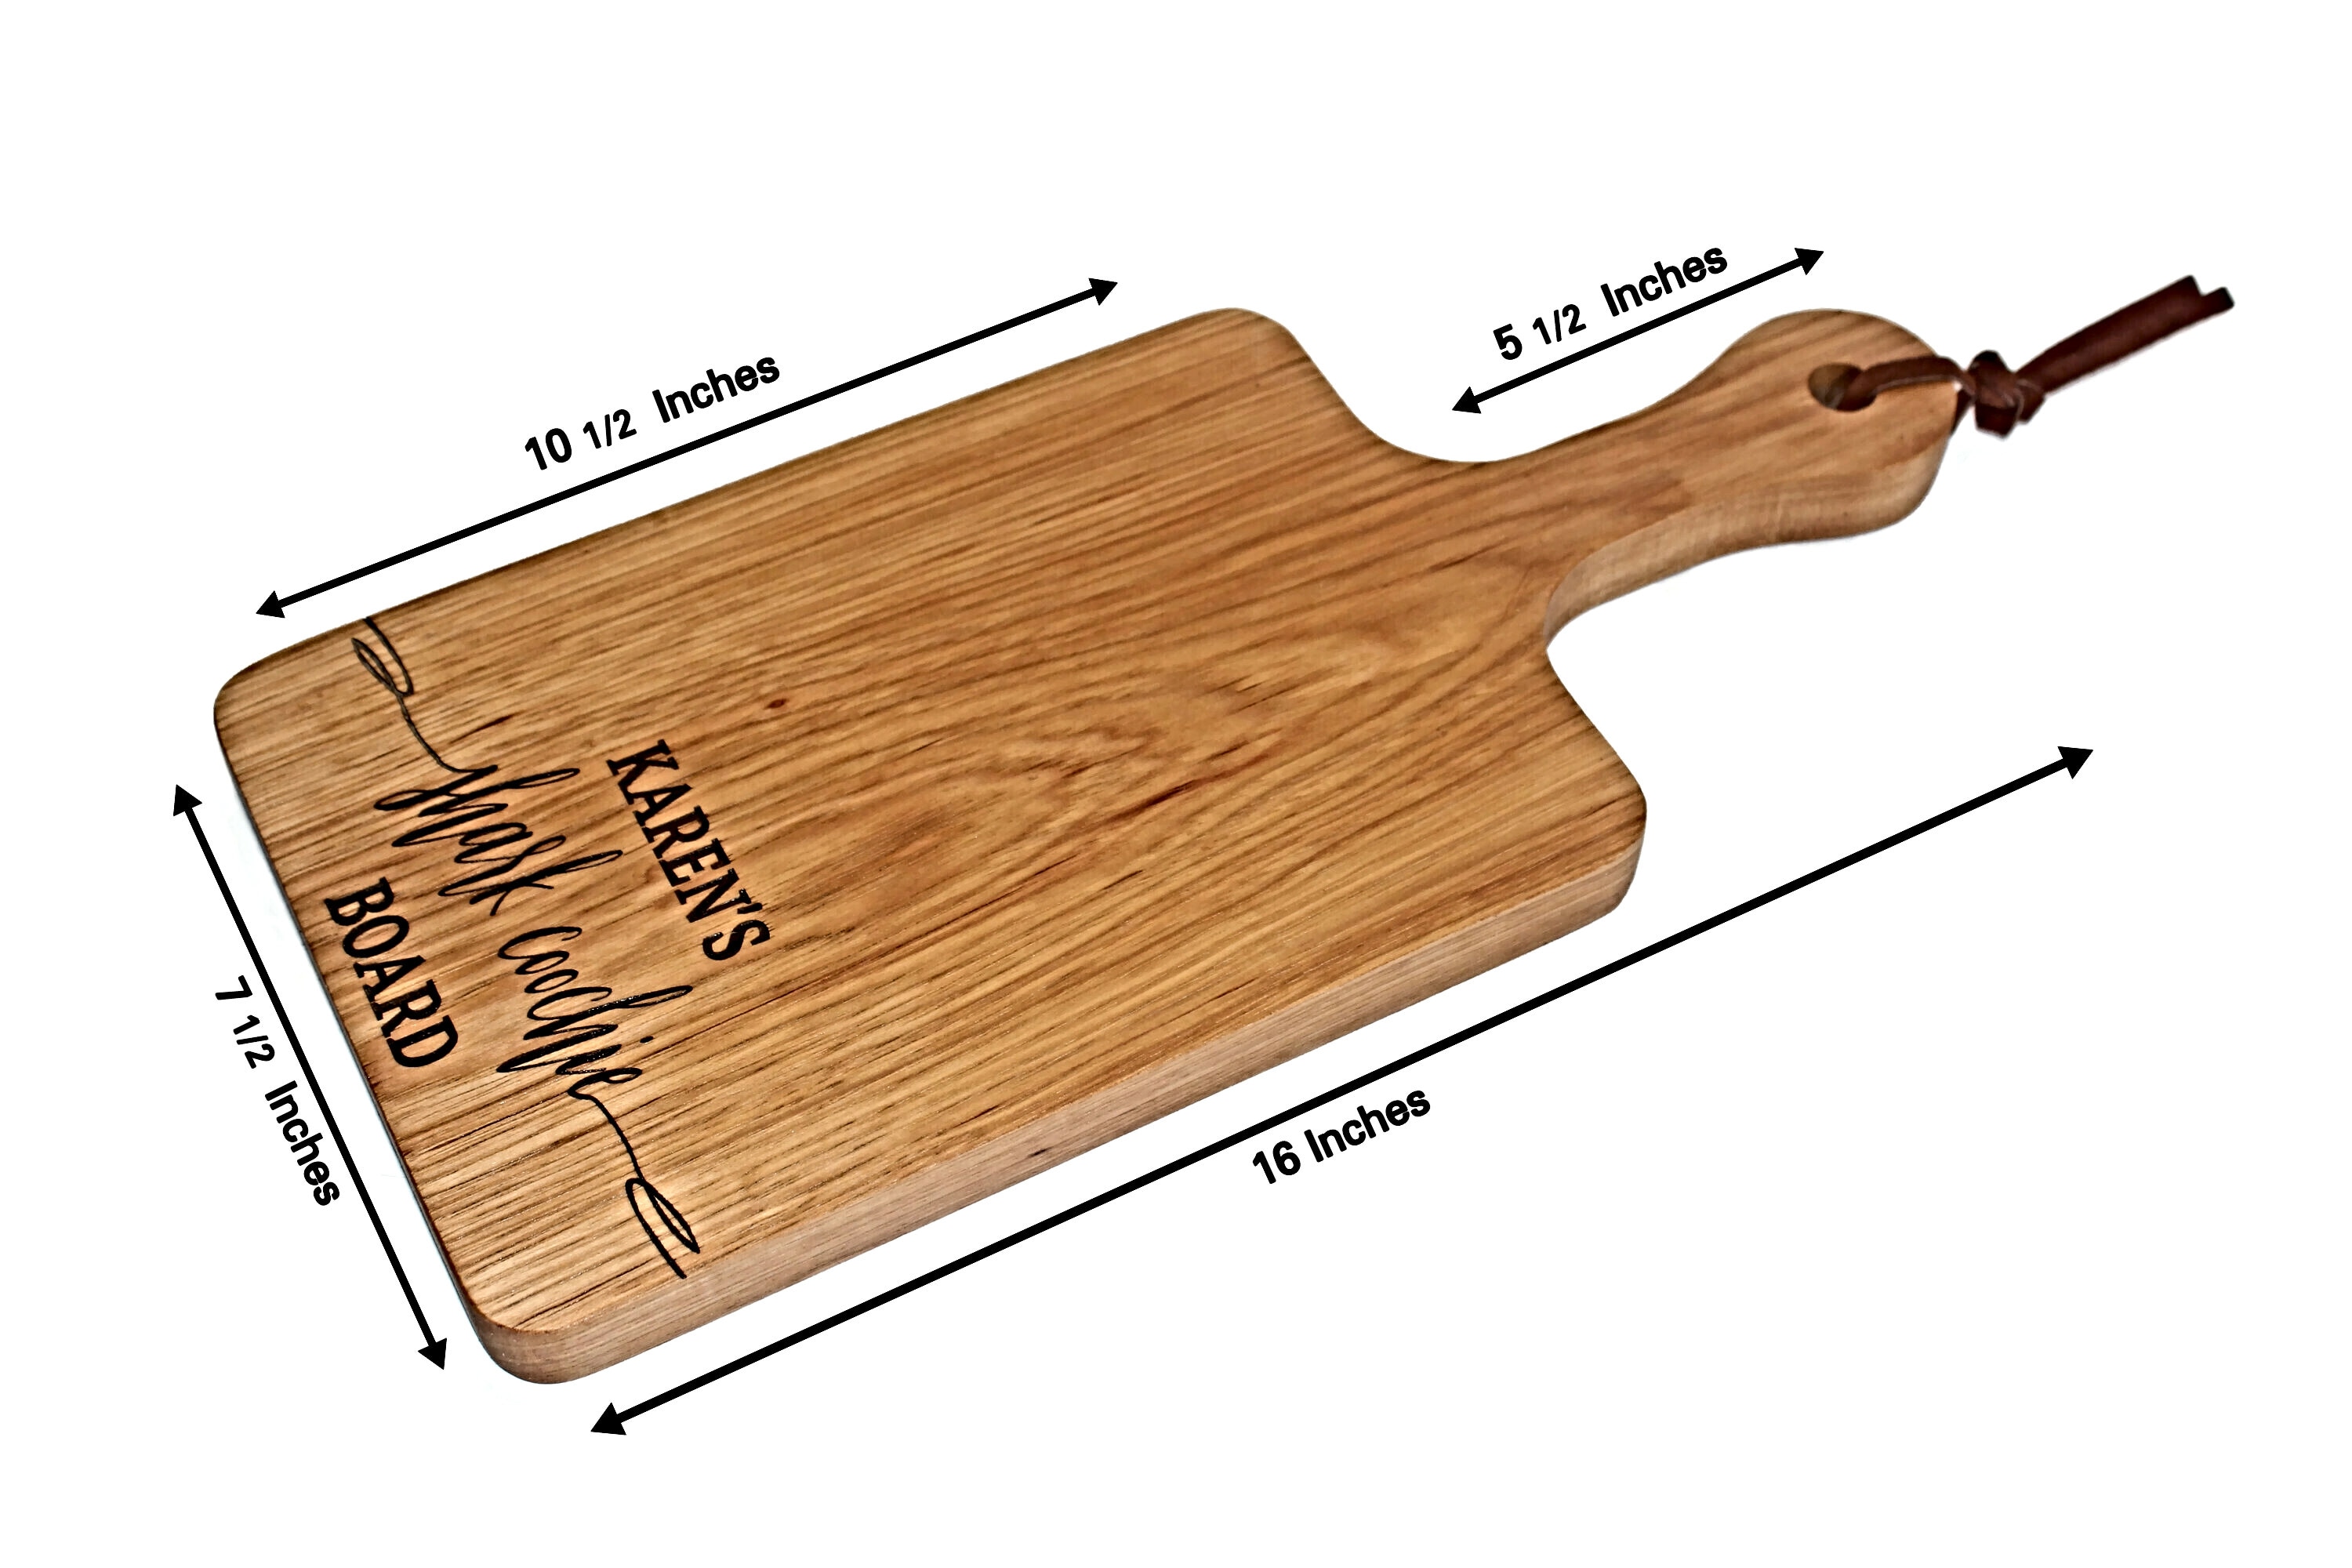 Cutting Boards Dimensions & Drawings